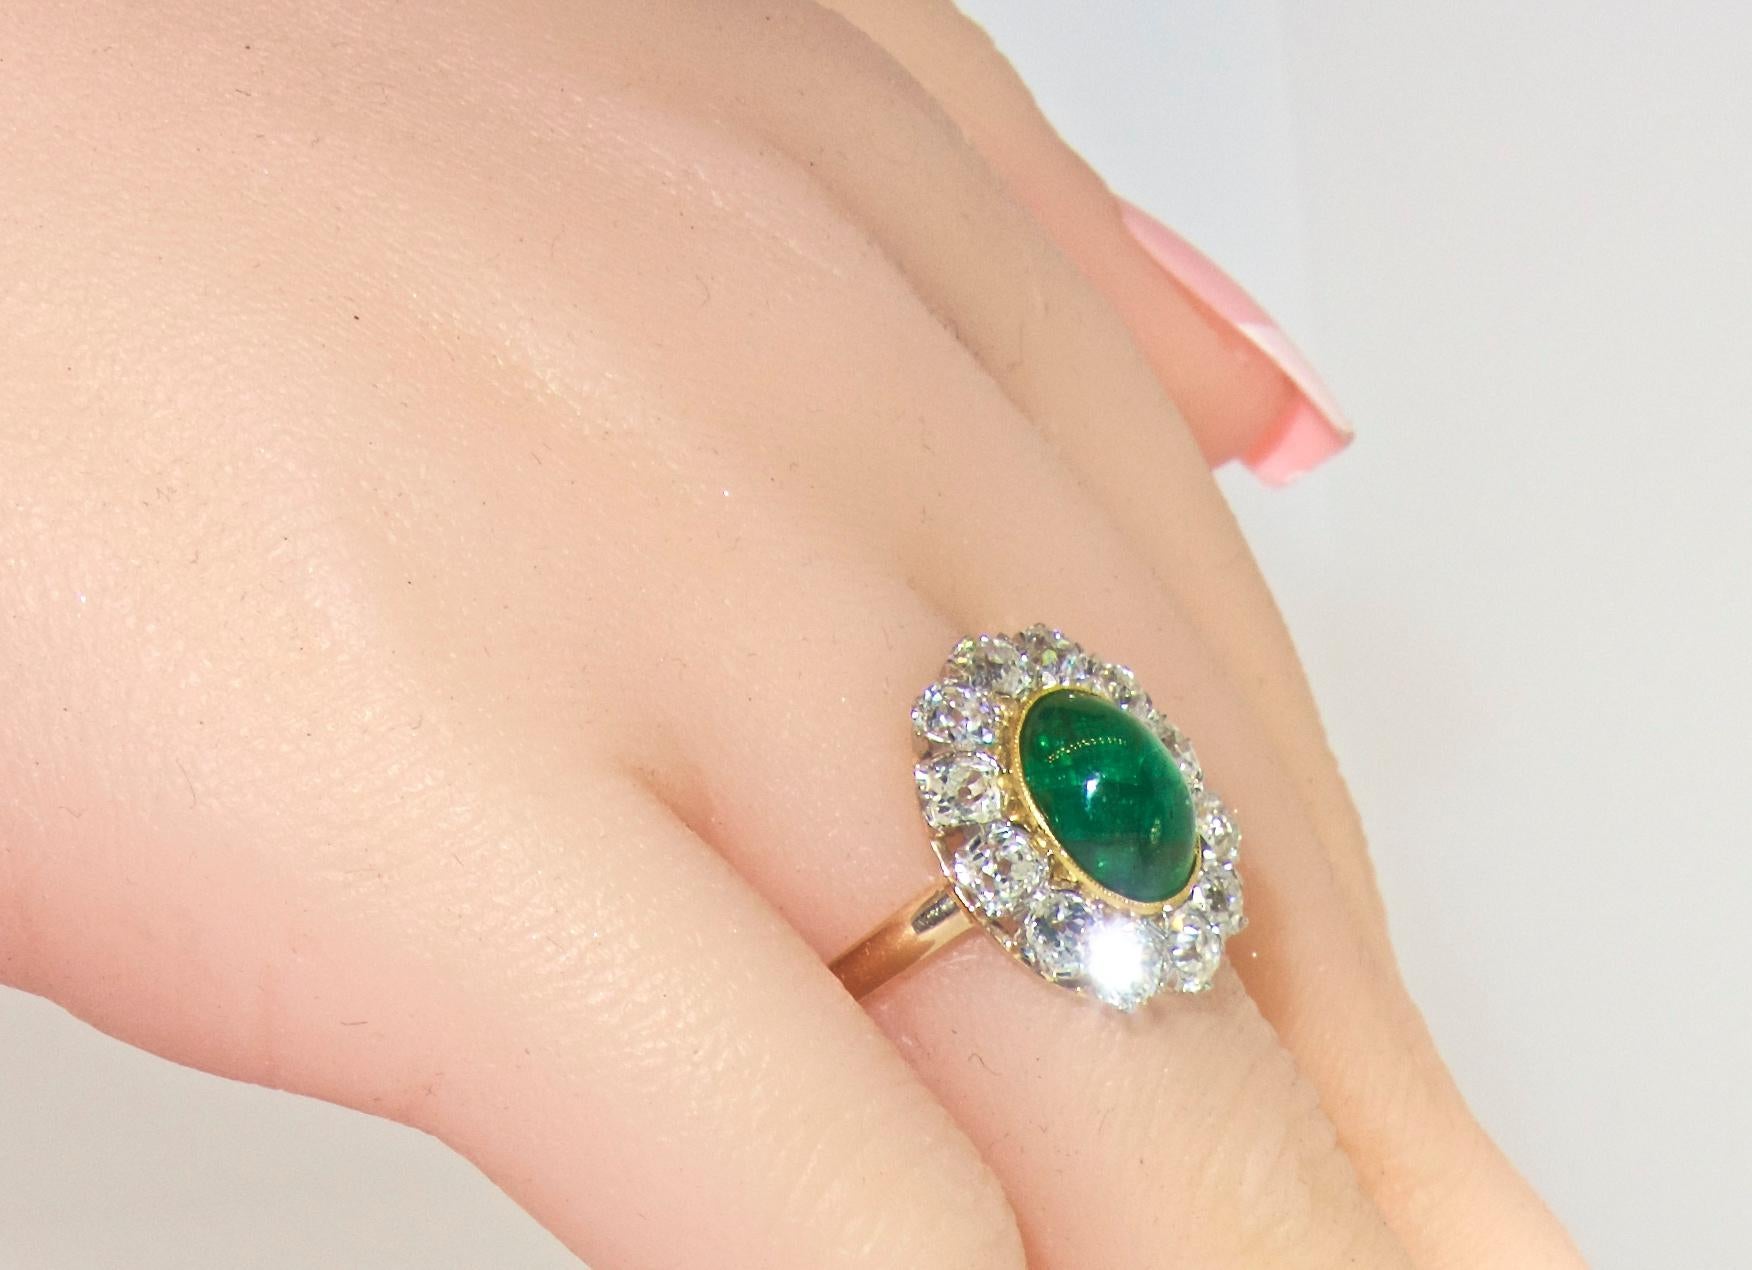 The center natural bright green emerald is a cabochon cut weighing approximately 3.5 cts.  This fine pure green emerald is surrounded by 12 old cut diamonds - all near colorless H/I and very slightly included (VS), weighing approximately 2.0 cts. 